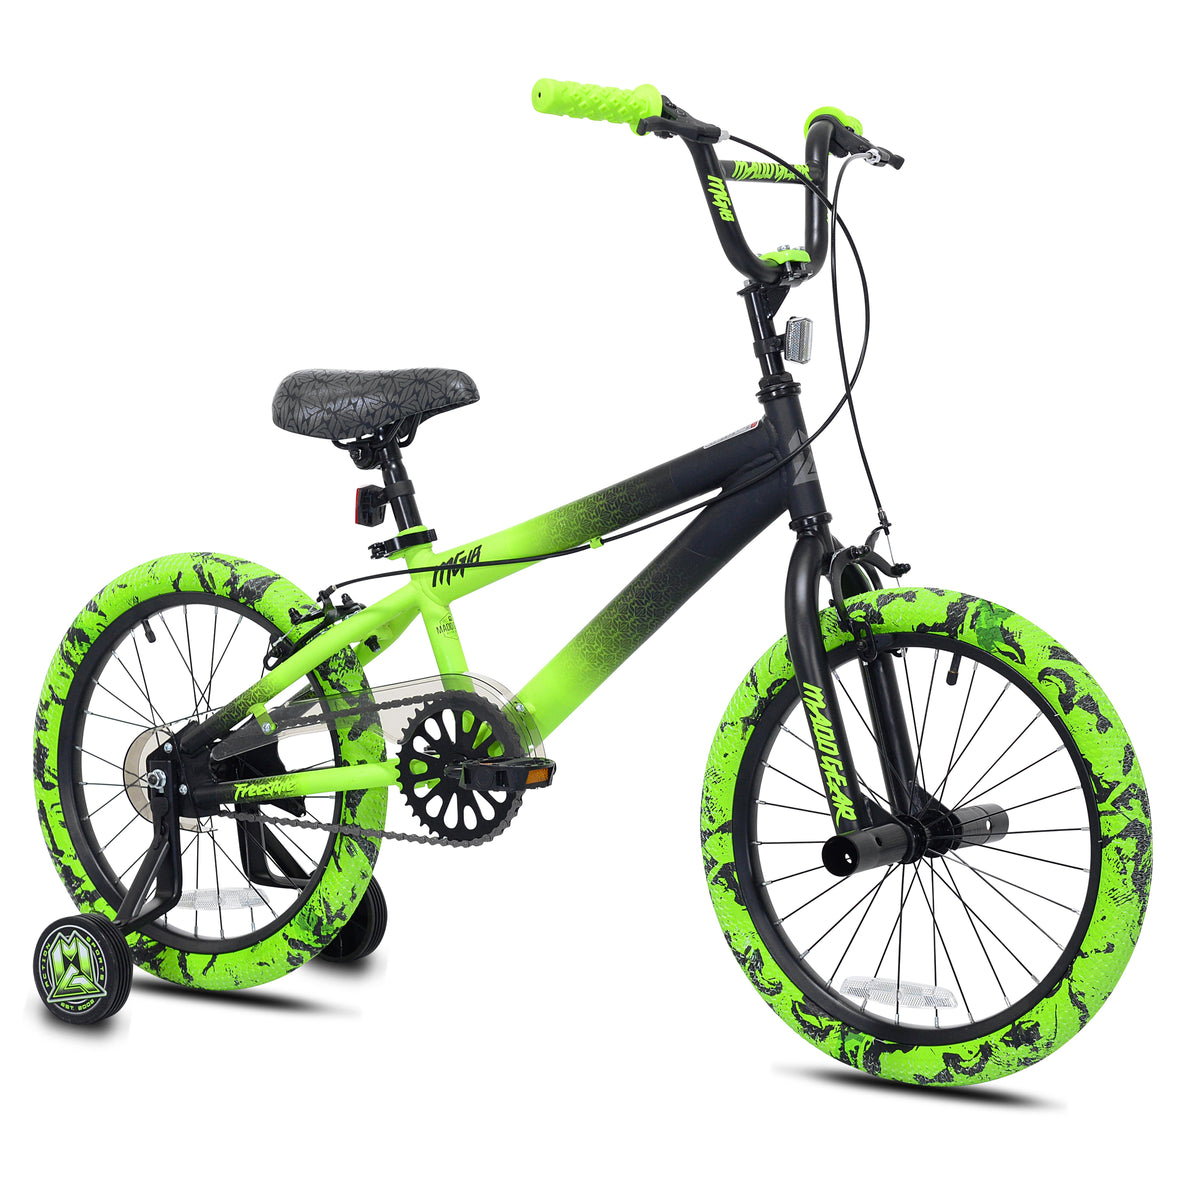 18" Madd Gear® MG18 | Bike for Kids Ages 5-8